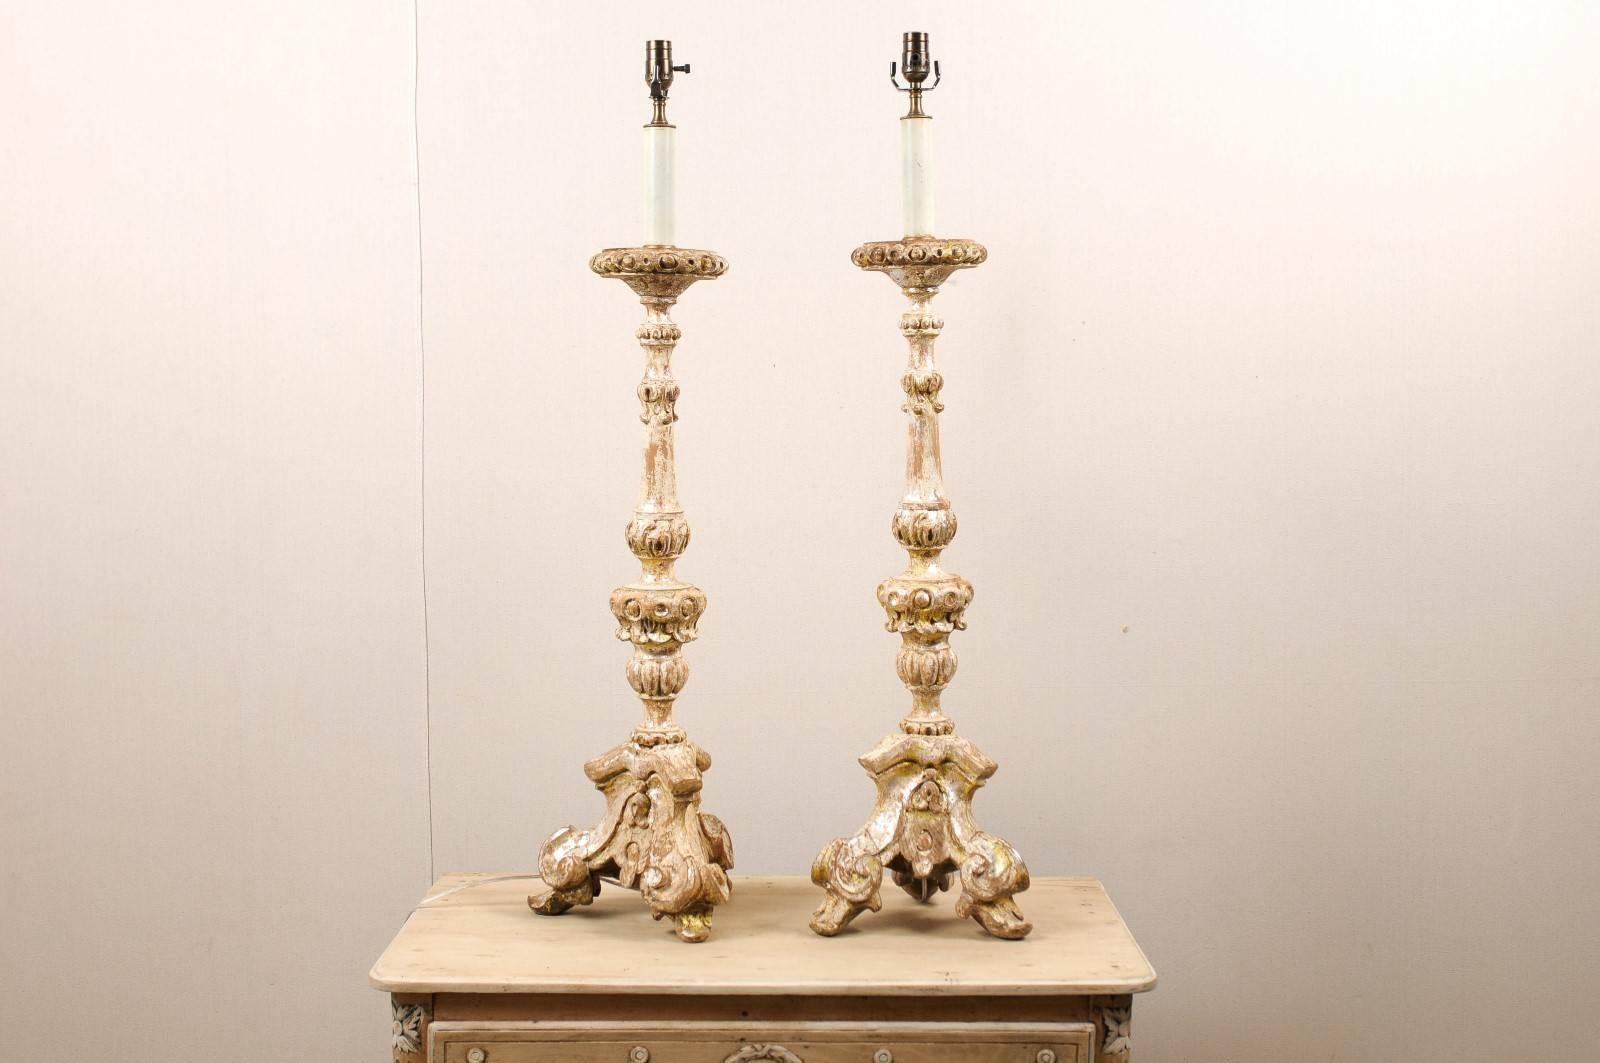 Italian Pair of Table Lamps Made from 19th Century Wood Altar Sticks, Silver Finish